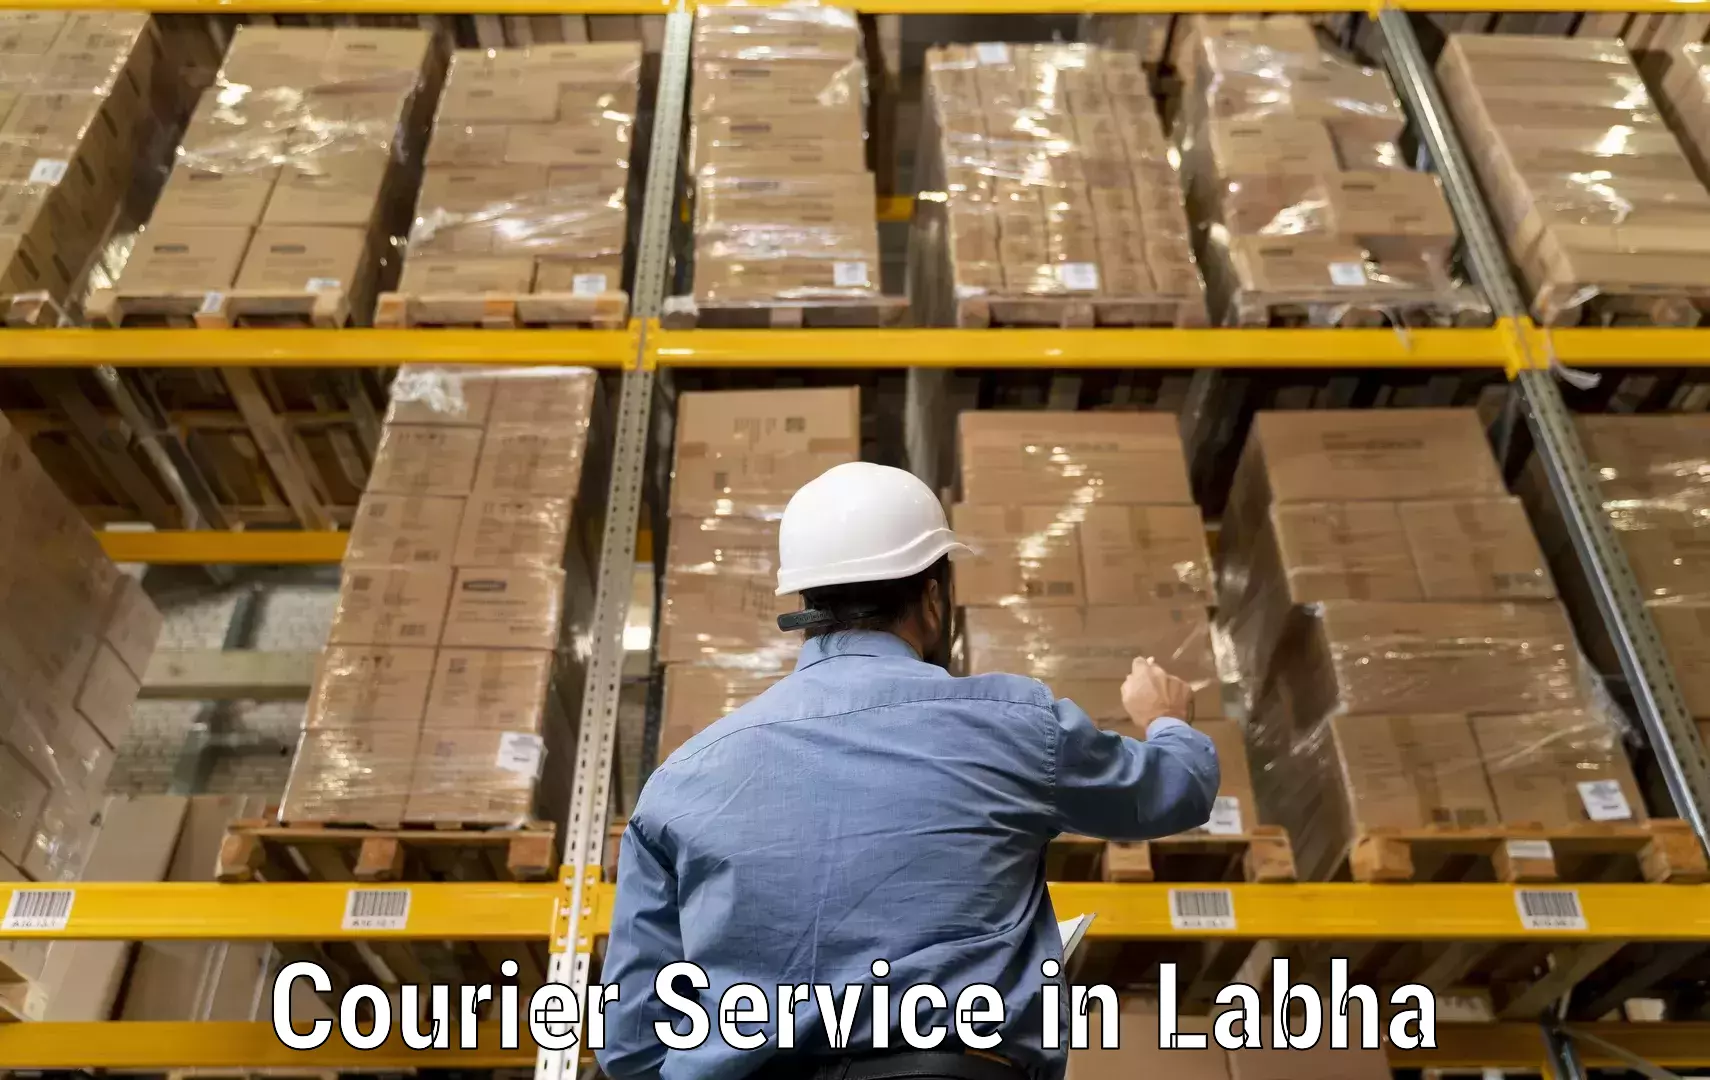 Premium delivery services in Labha